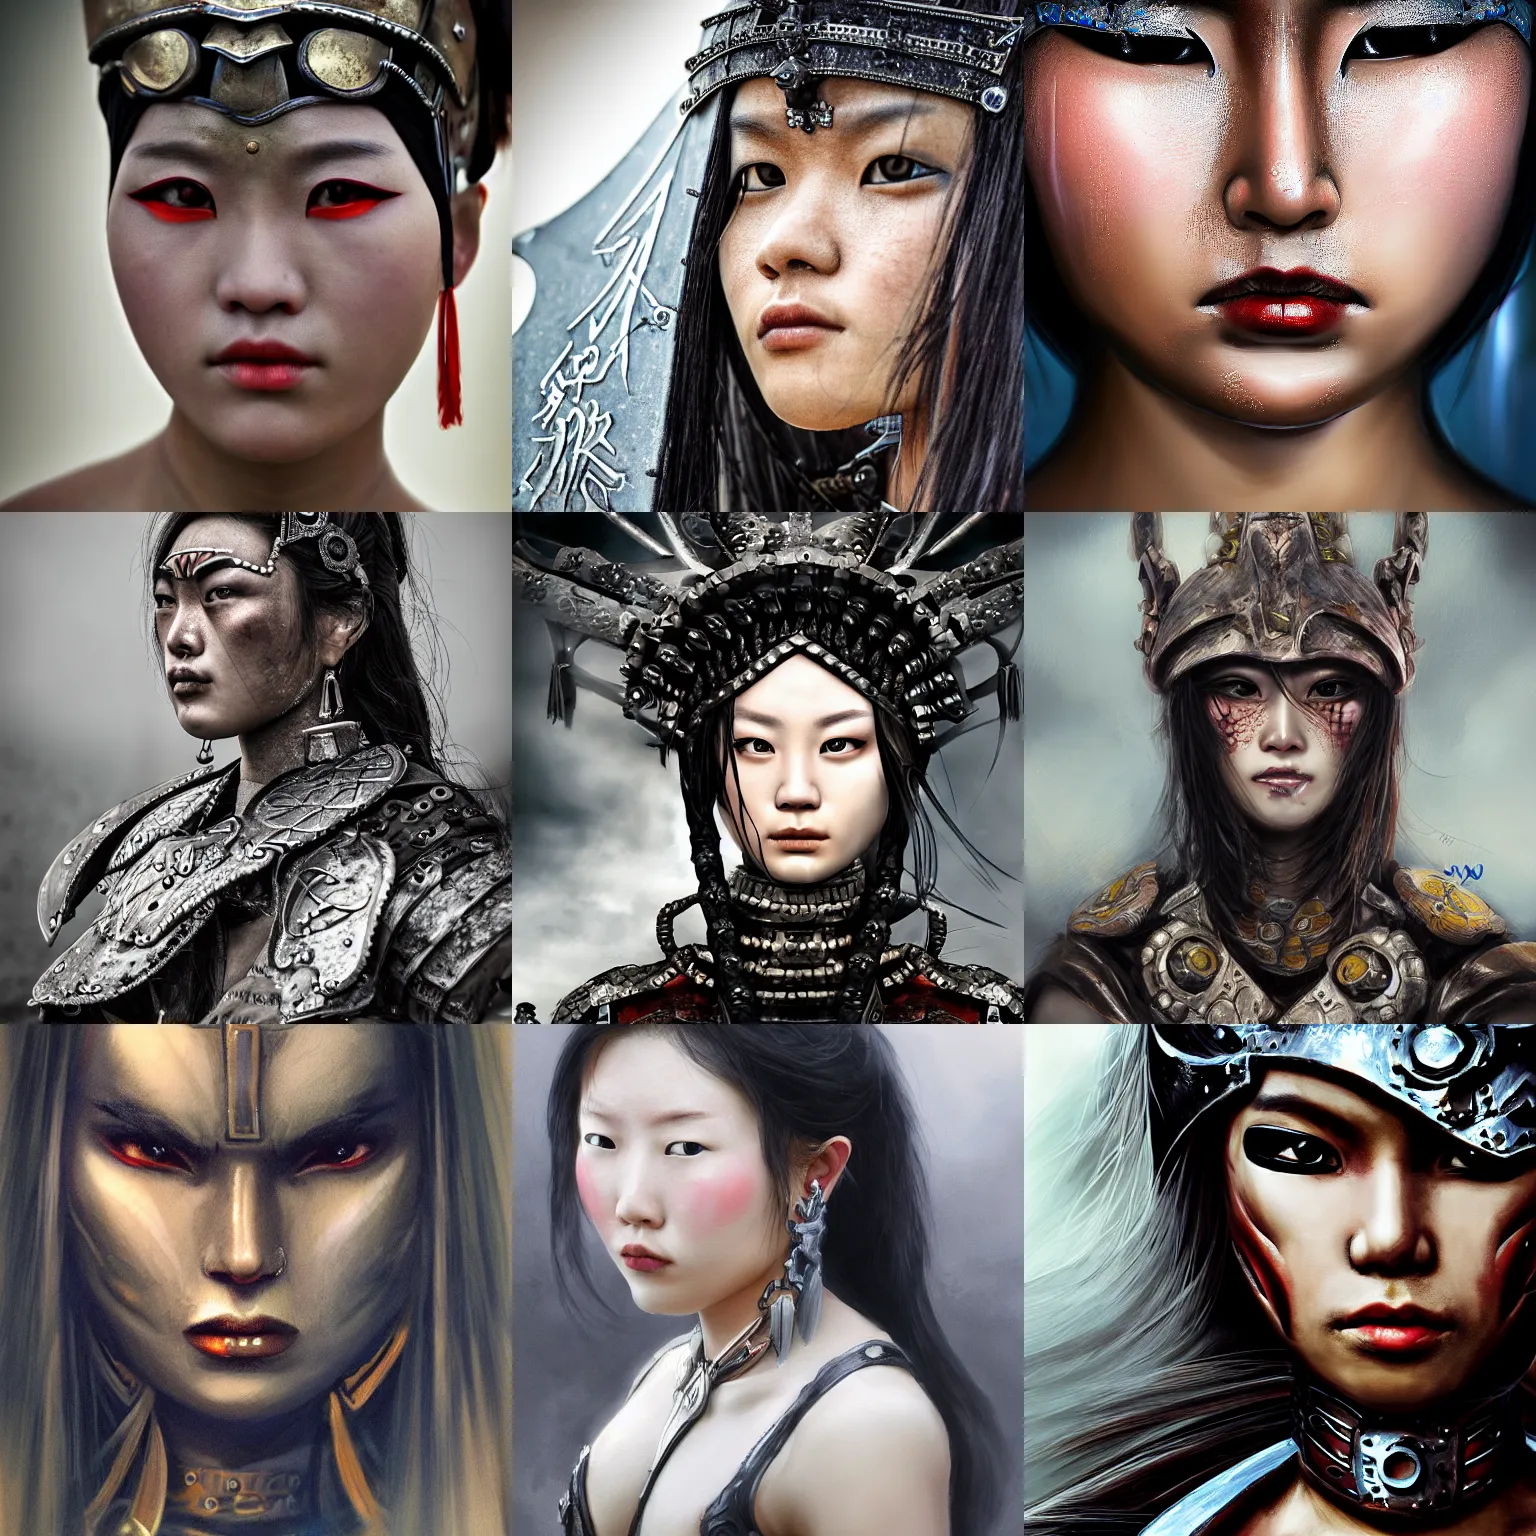 Prompt: a close up portrait of a menacing, beautiful, iron - clad female warrior by jiayuan song